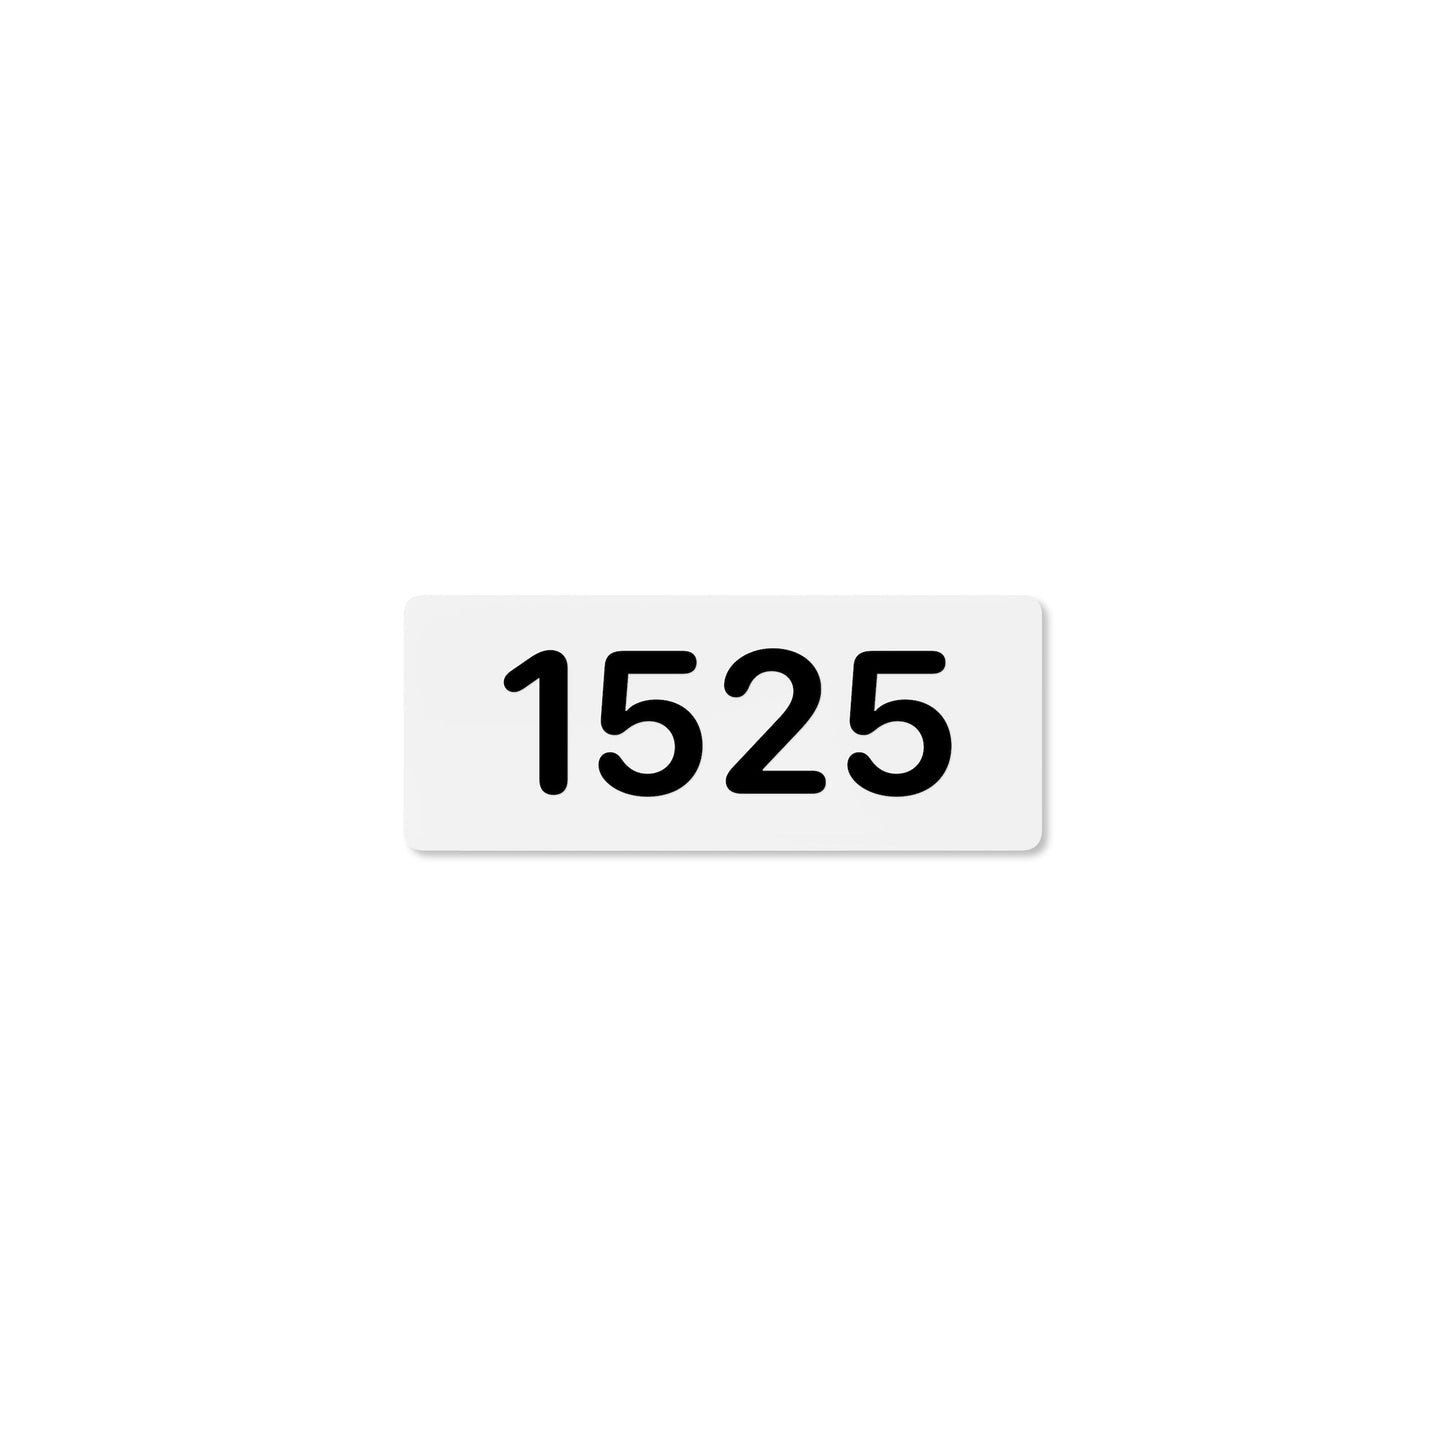 Numeral 1525